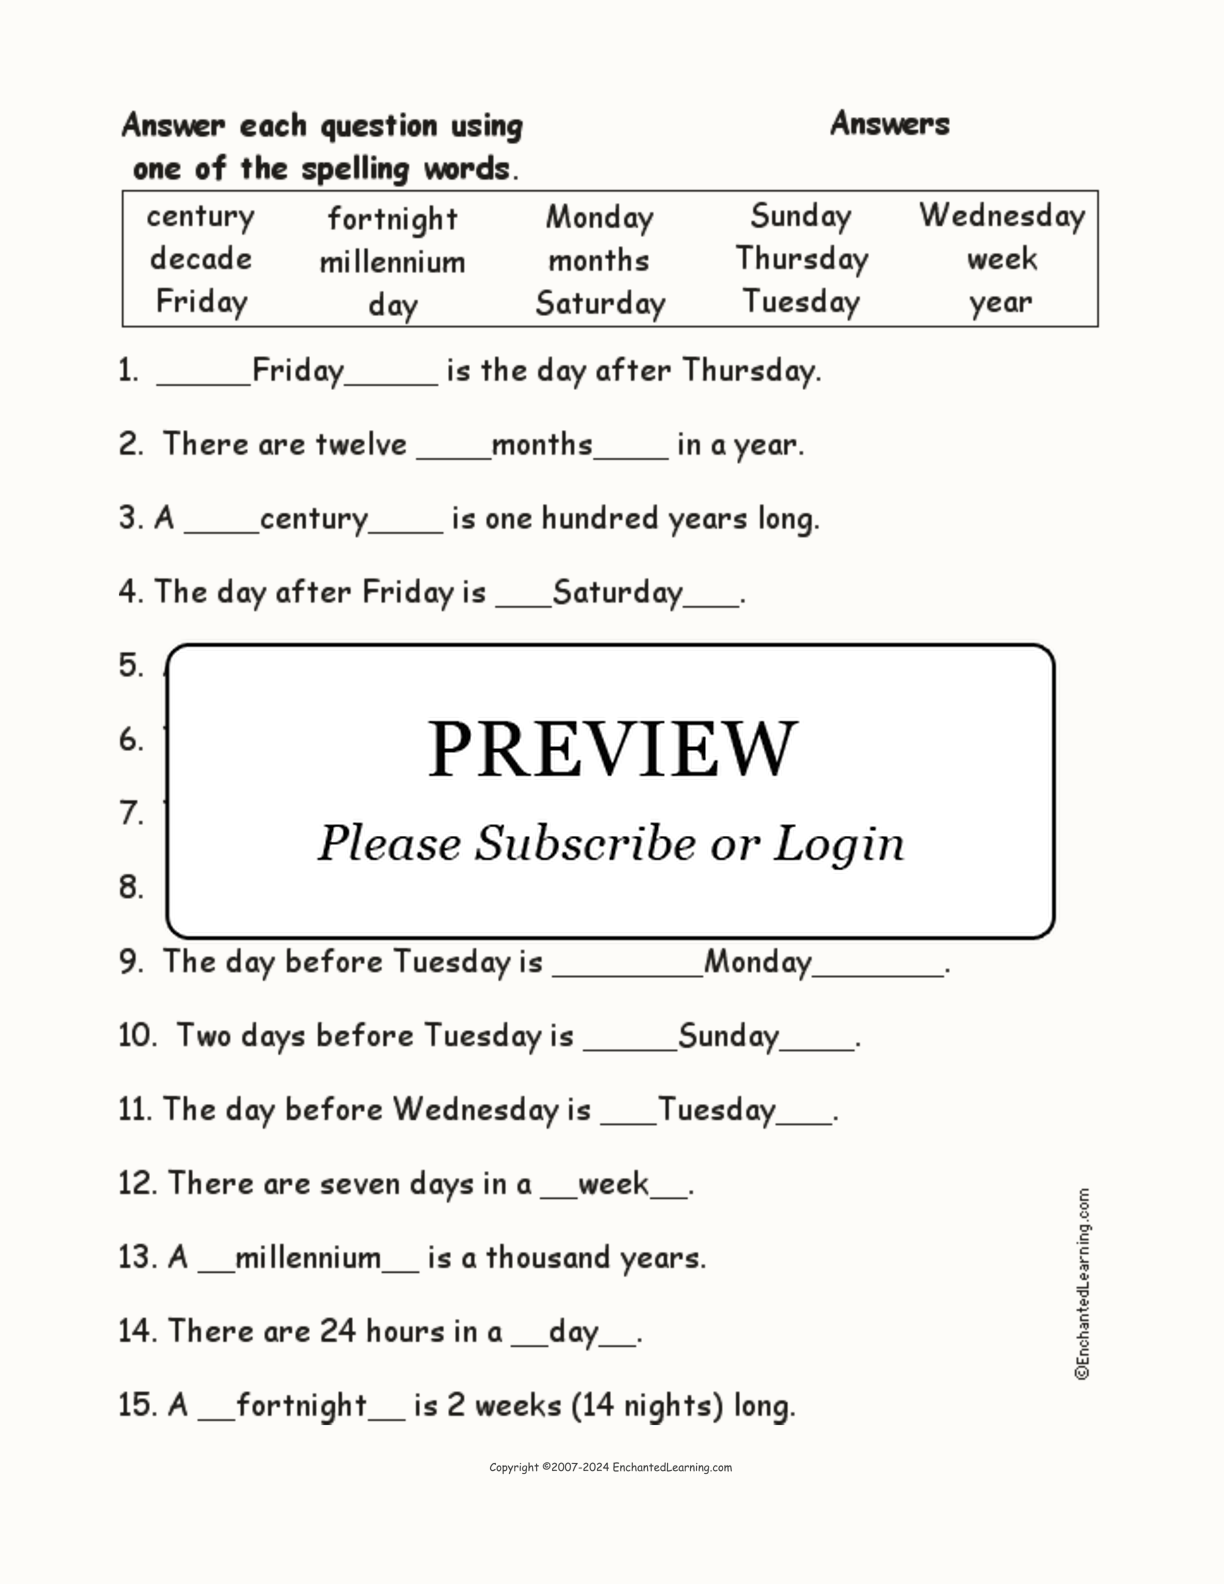 Calendar Spelling Word Questions interactive worksheet page 2